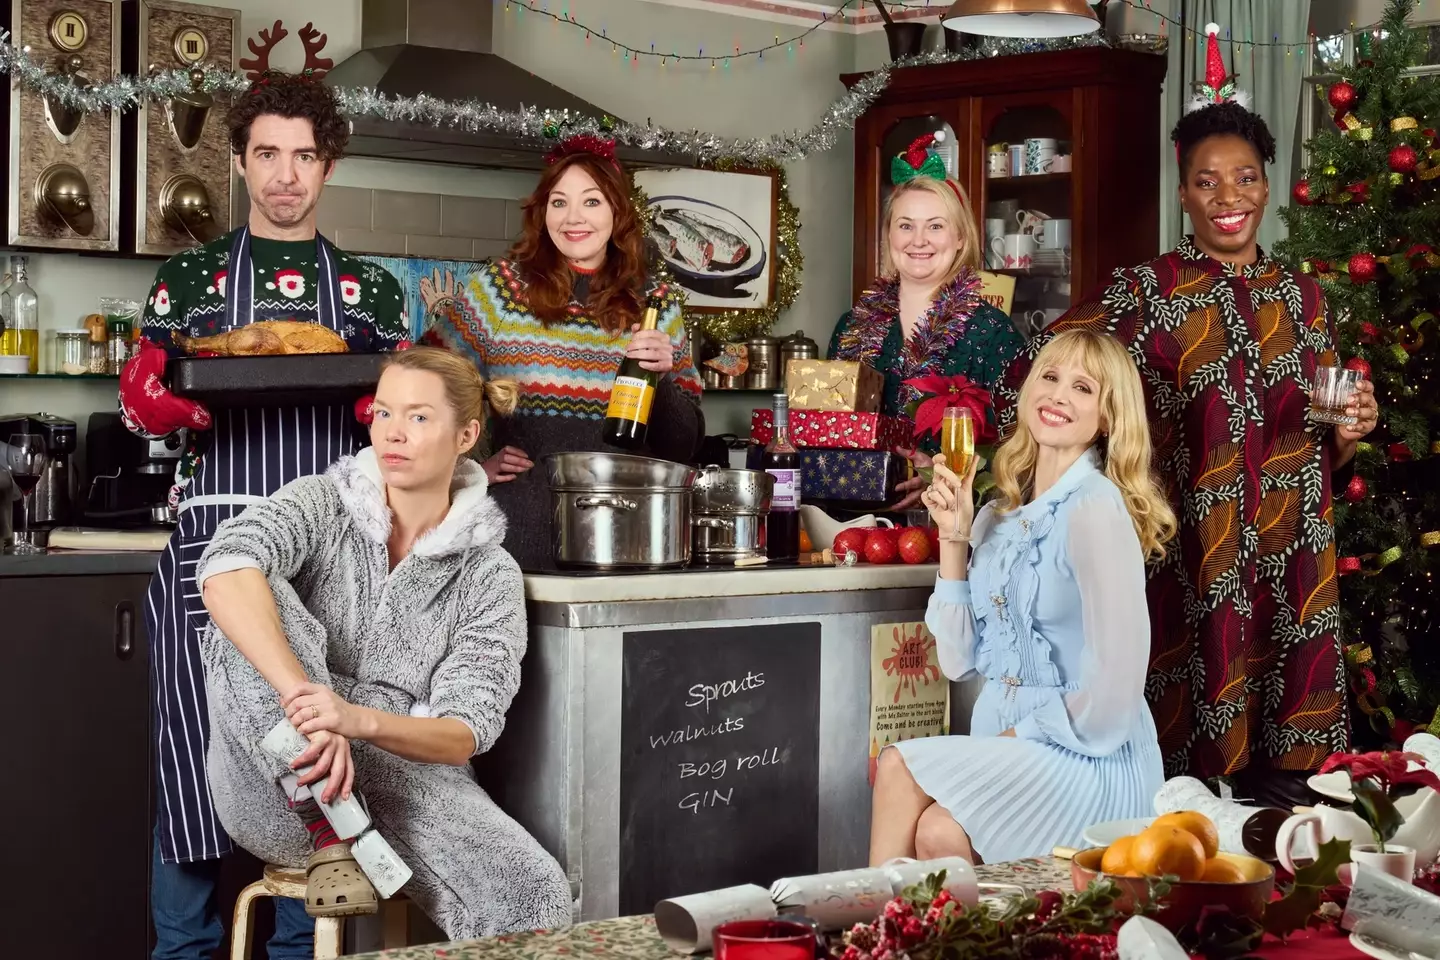 Motherland is back for a special festive episode.